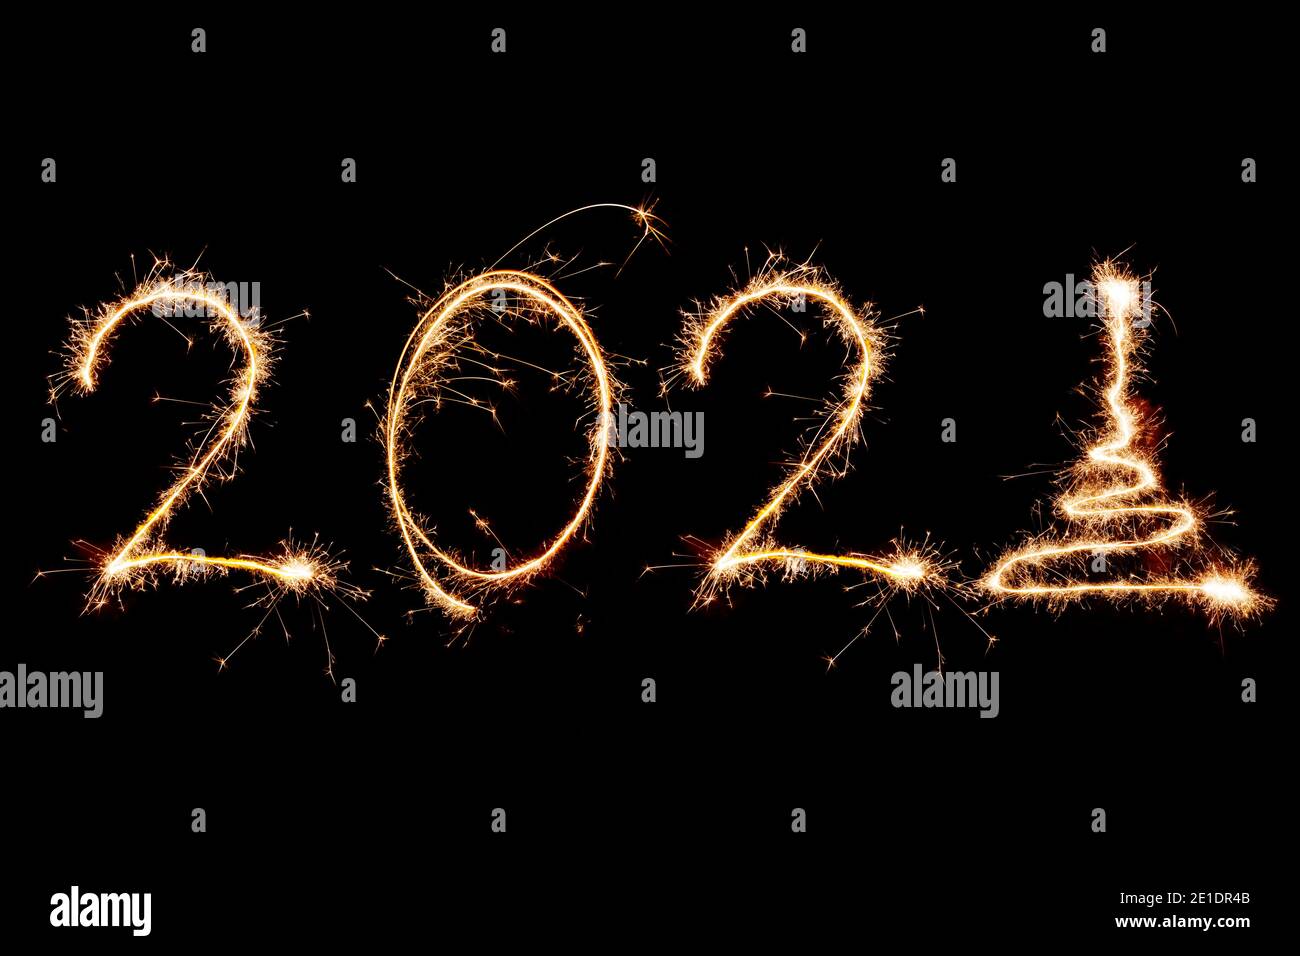 2021 written with Sparkle firework on black background, happy new year 2021 concept. Stock Photo